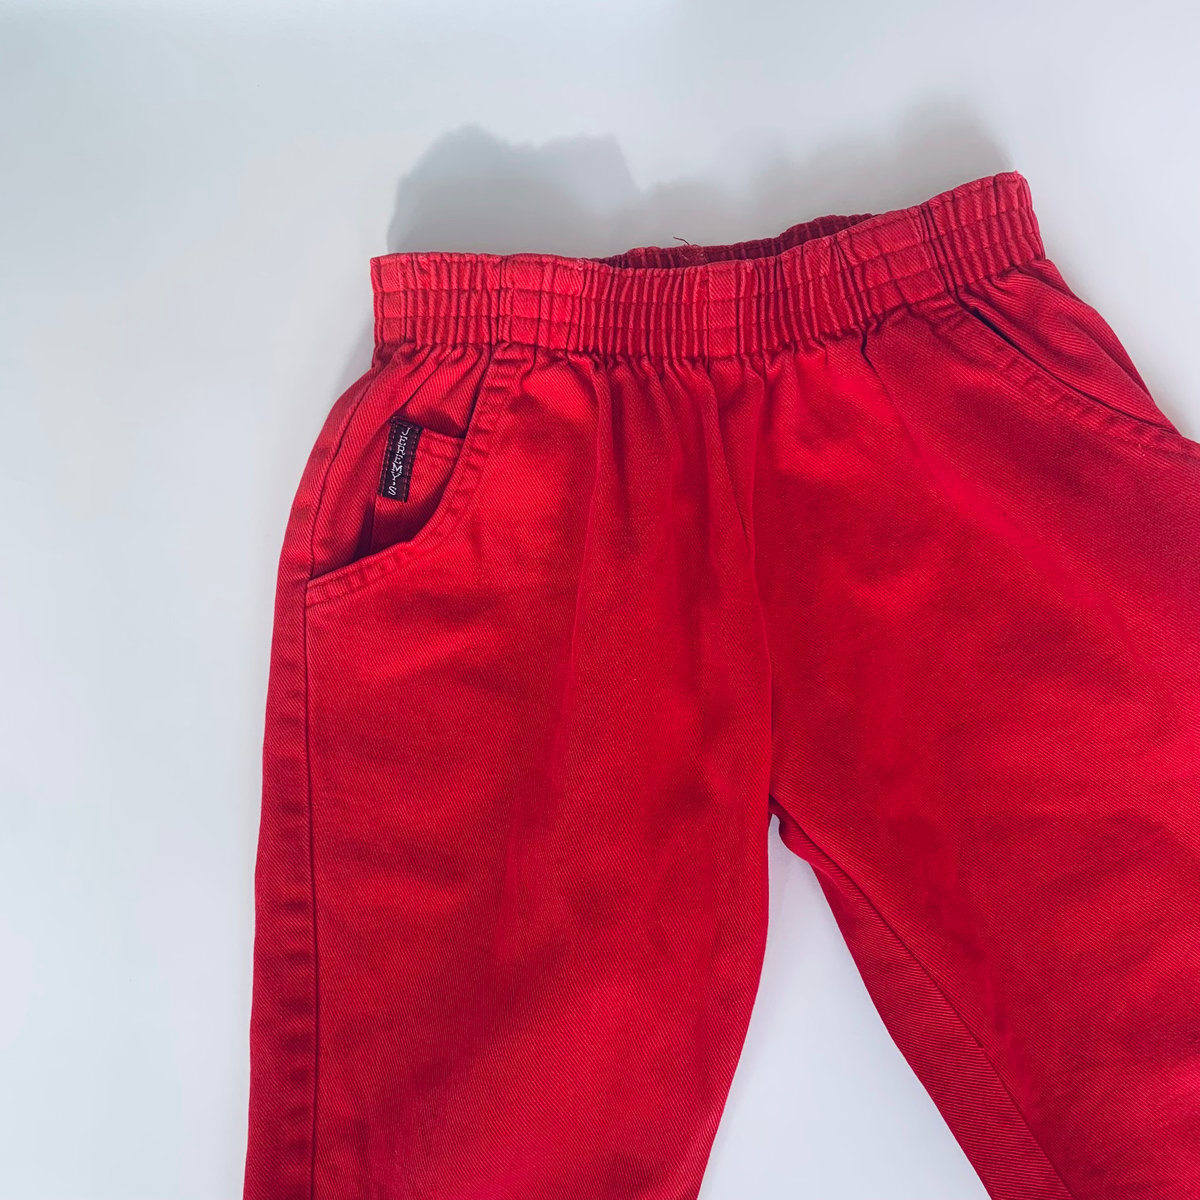 Image of Red jeans size 5-6 years 